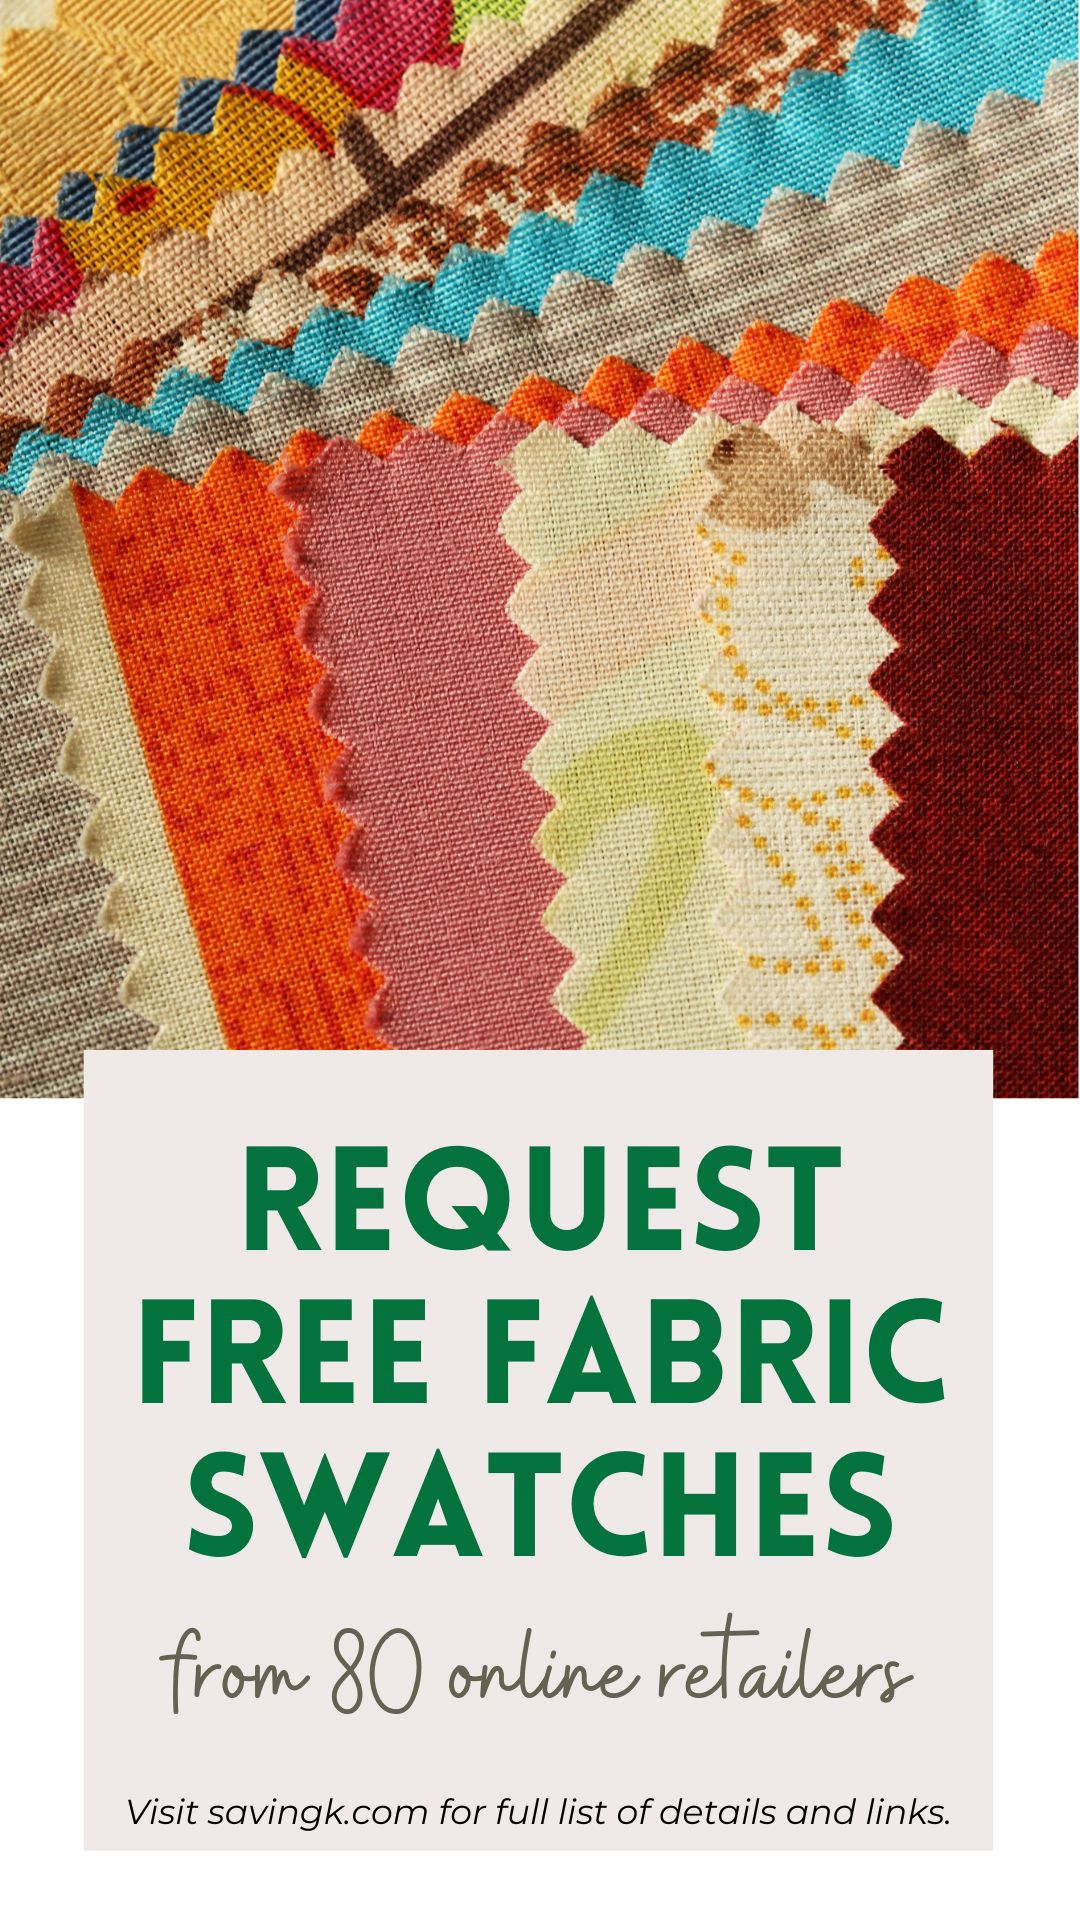 Request Free Fabric Swatches